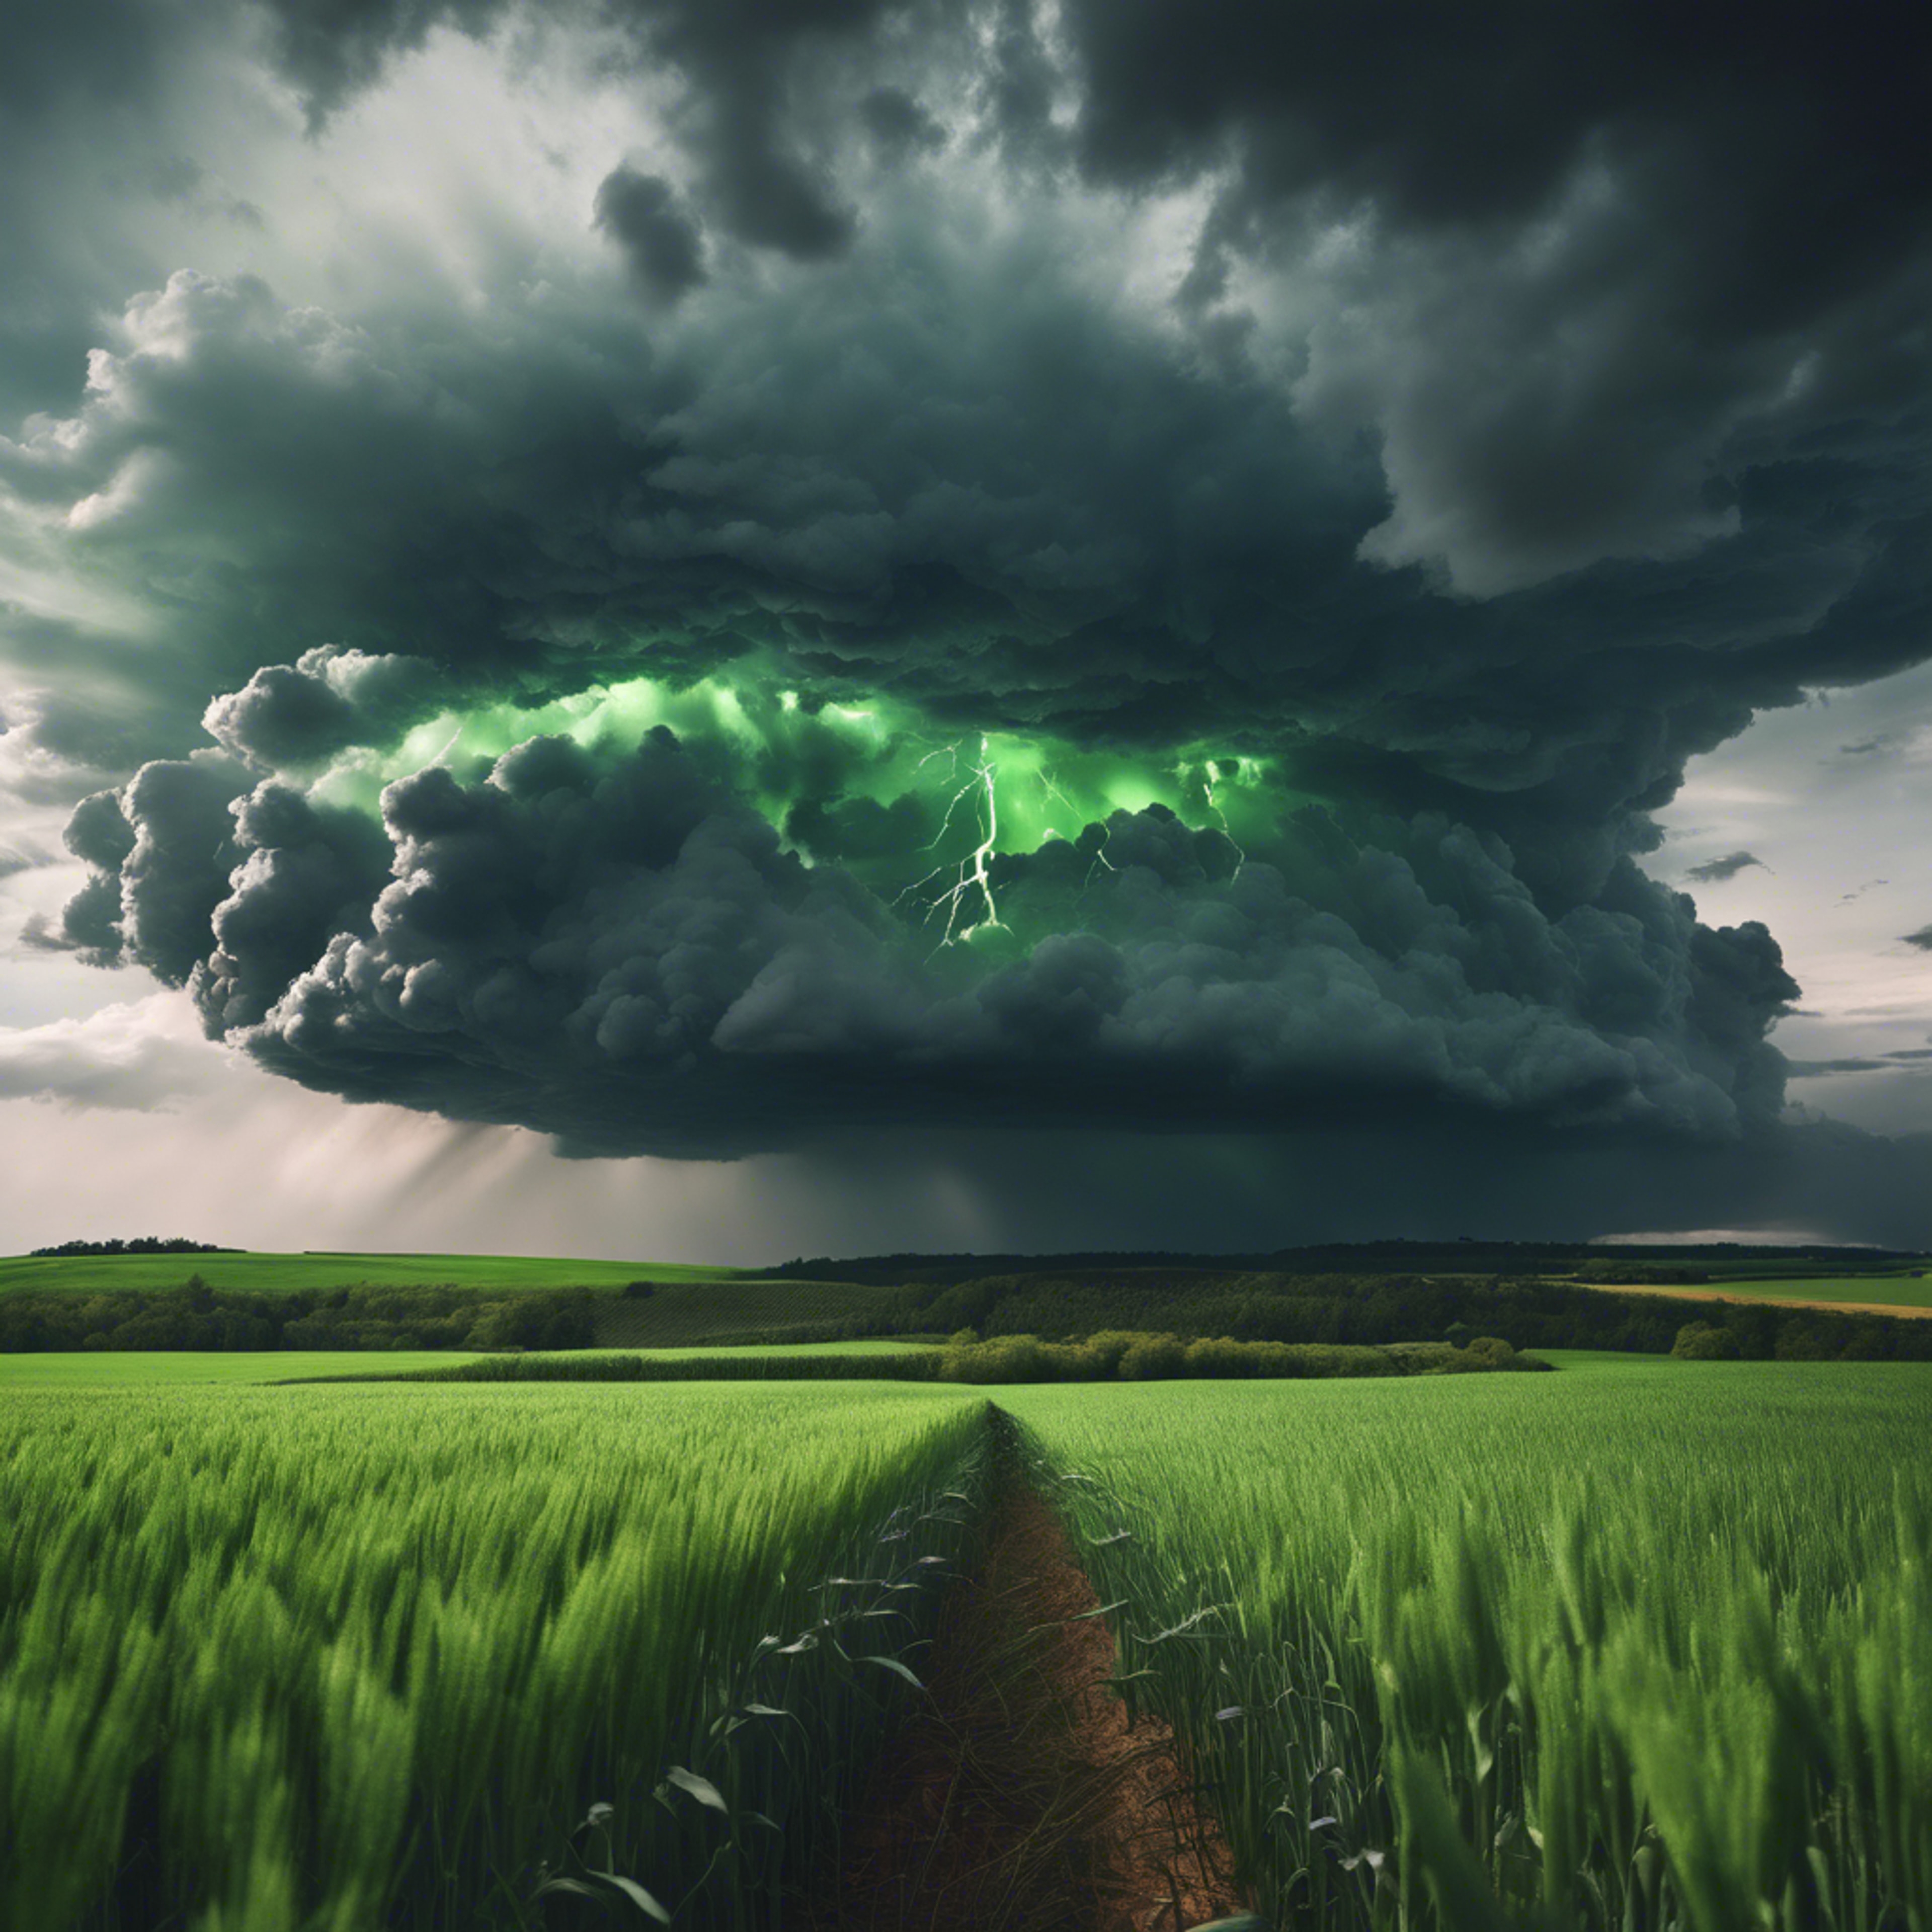 A dramatic black storm cloud over a vibrant green wheat field. Tapet[2ef08a34070042519f8d]